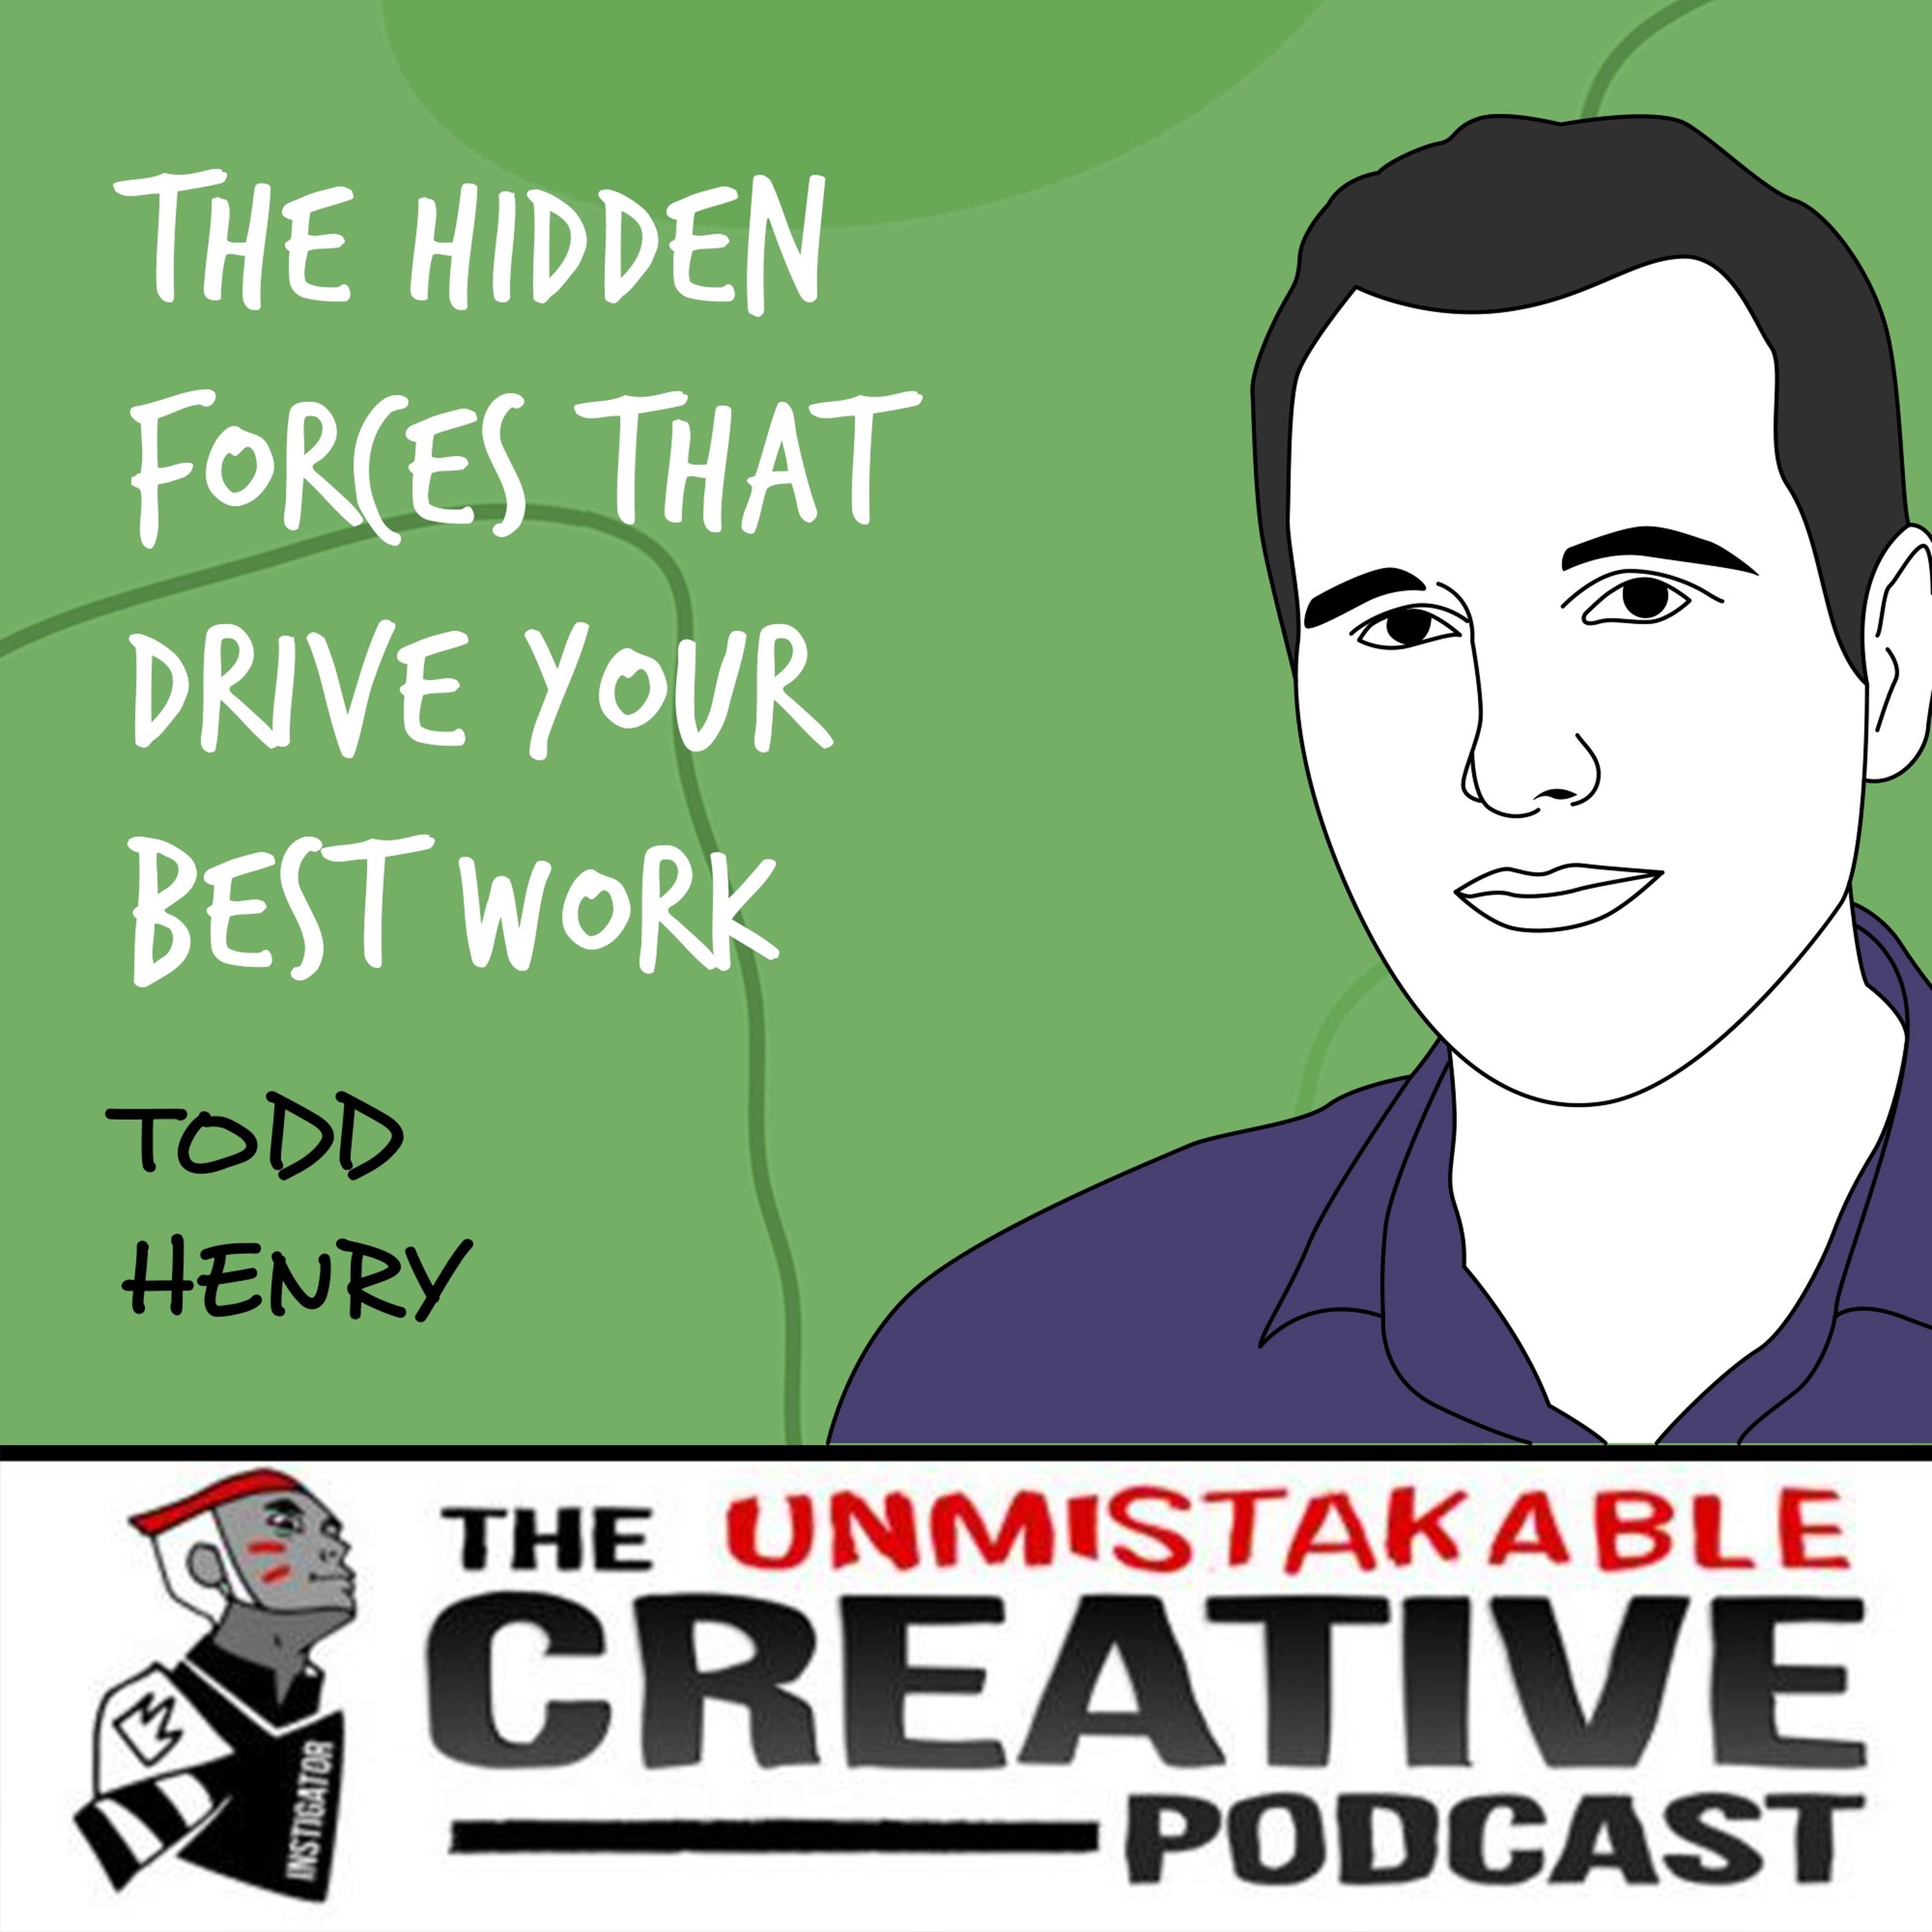 Todd Henry | The Hidden Forces that Drive Your Best Work Image